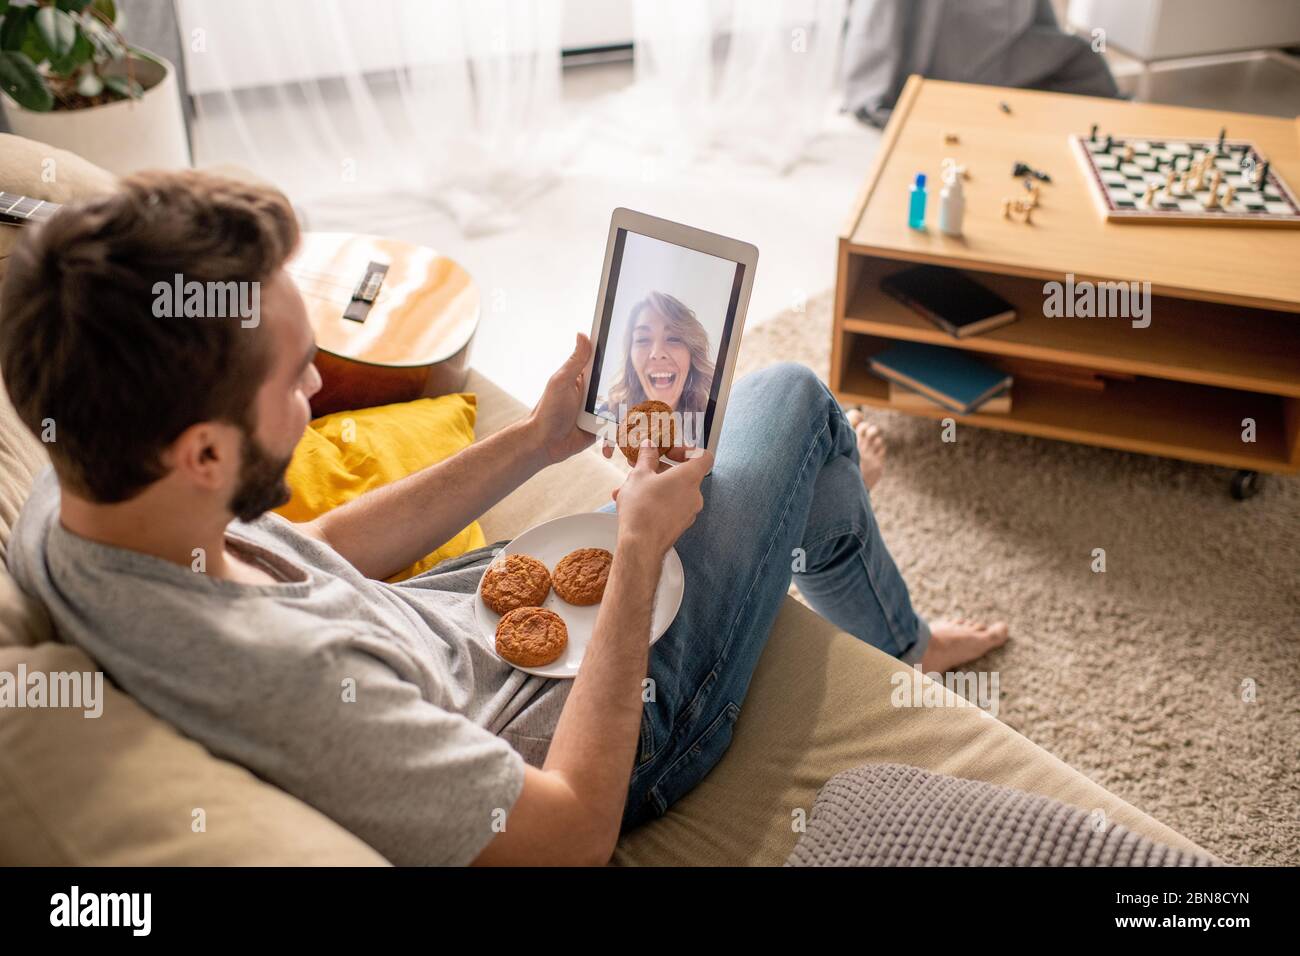 Young man sitting on sofa and using tablet while chatting with girlfriend, she pretending to eat cookie given by him through tablet screen Stock Photo